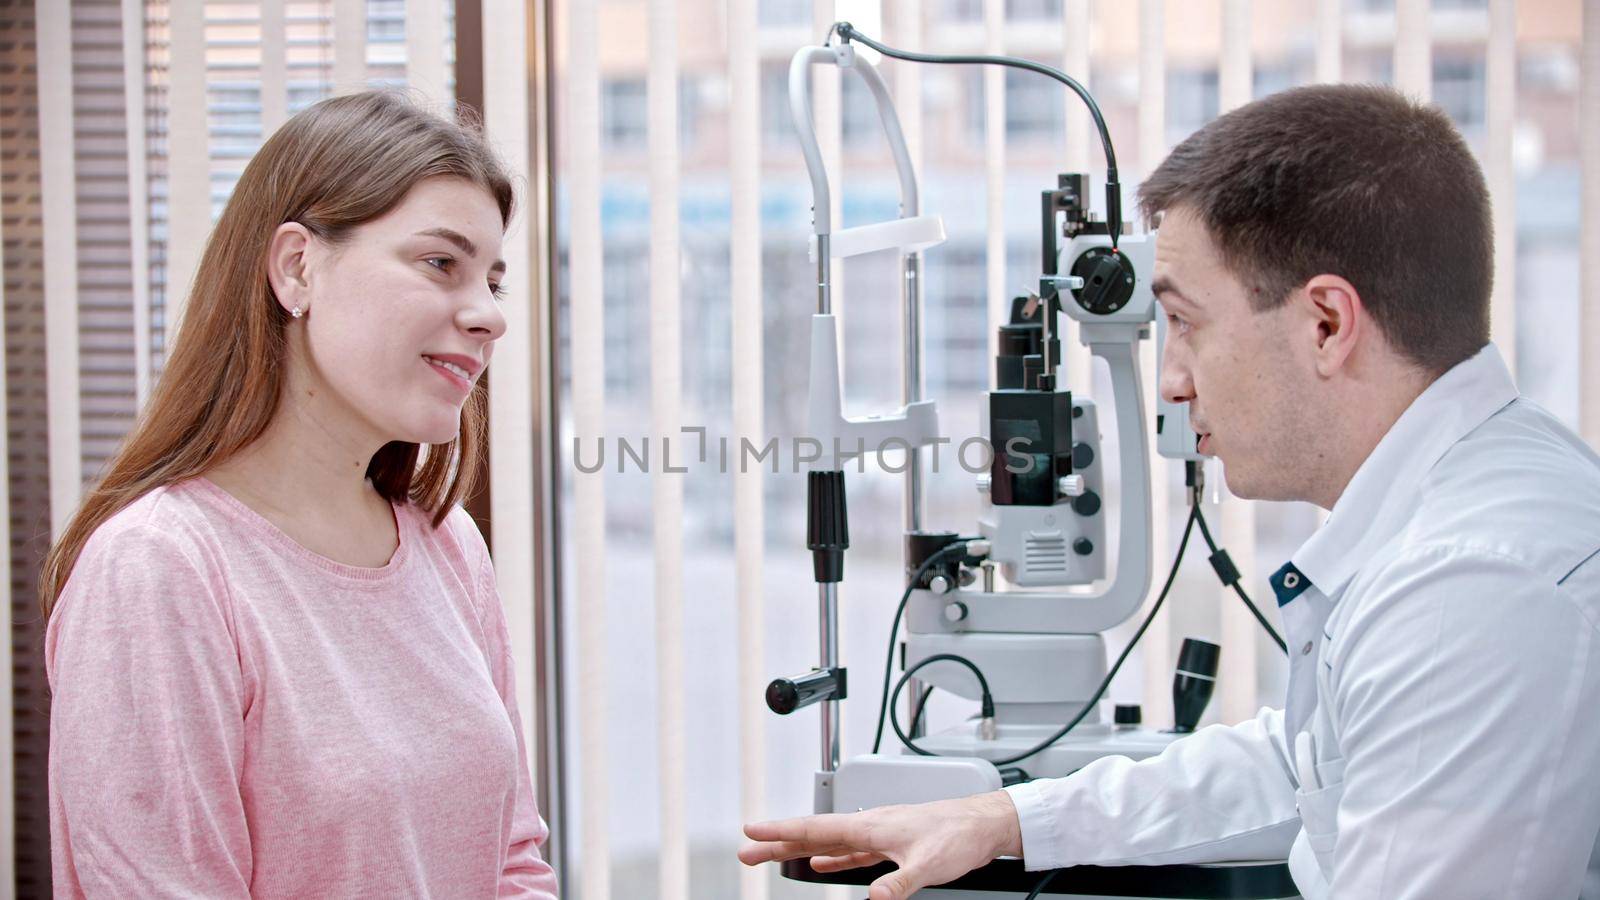 Ophthalmology treatment in the cabinet - young woman having a consultation with an optometry doctor. Mid shot